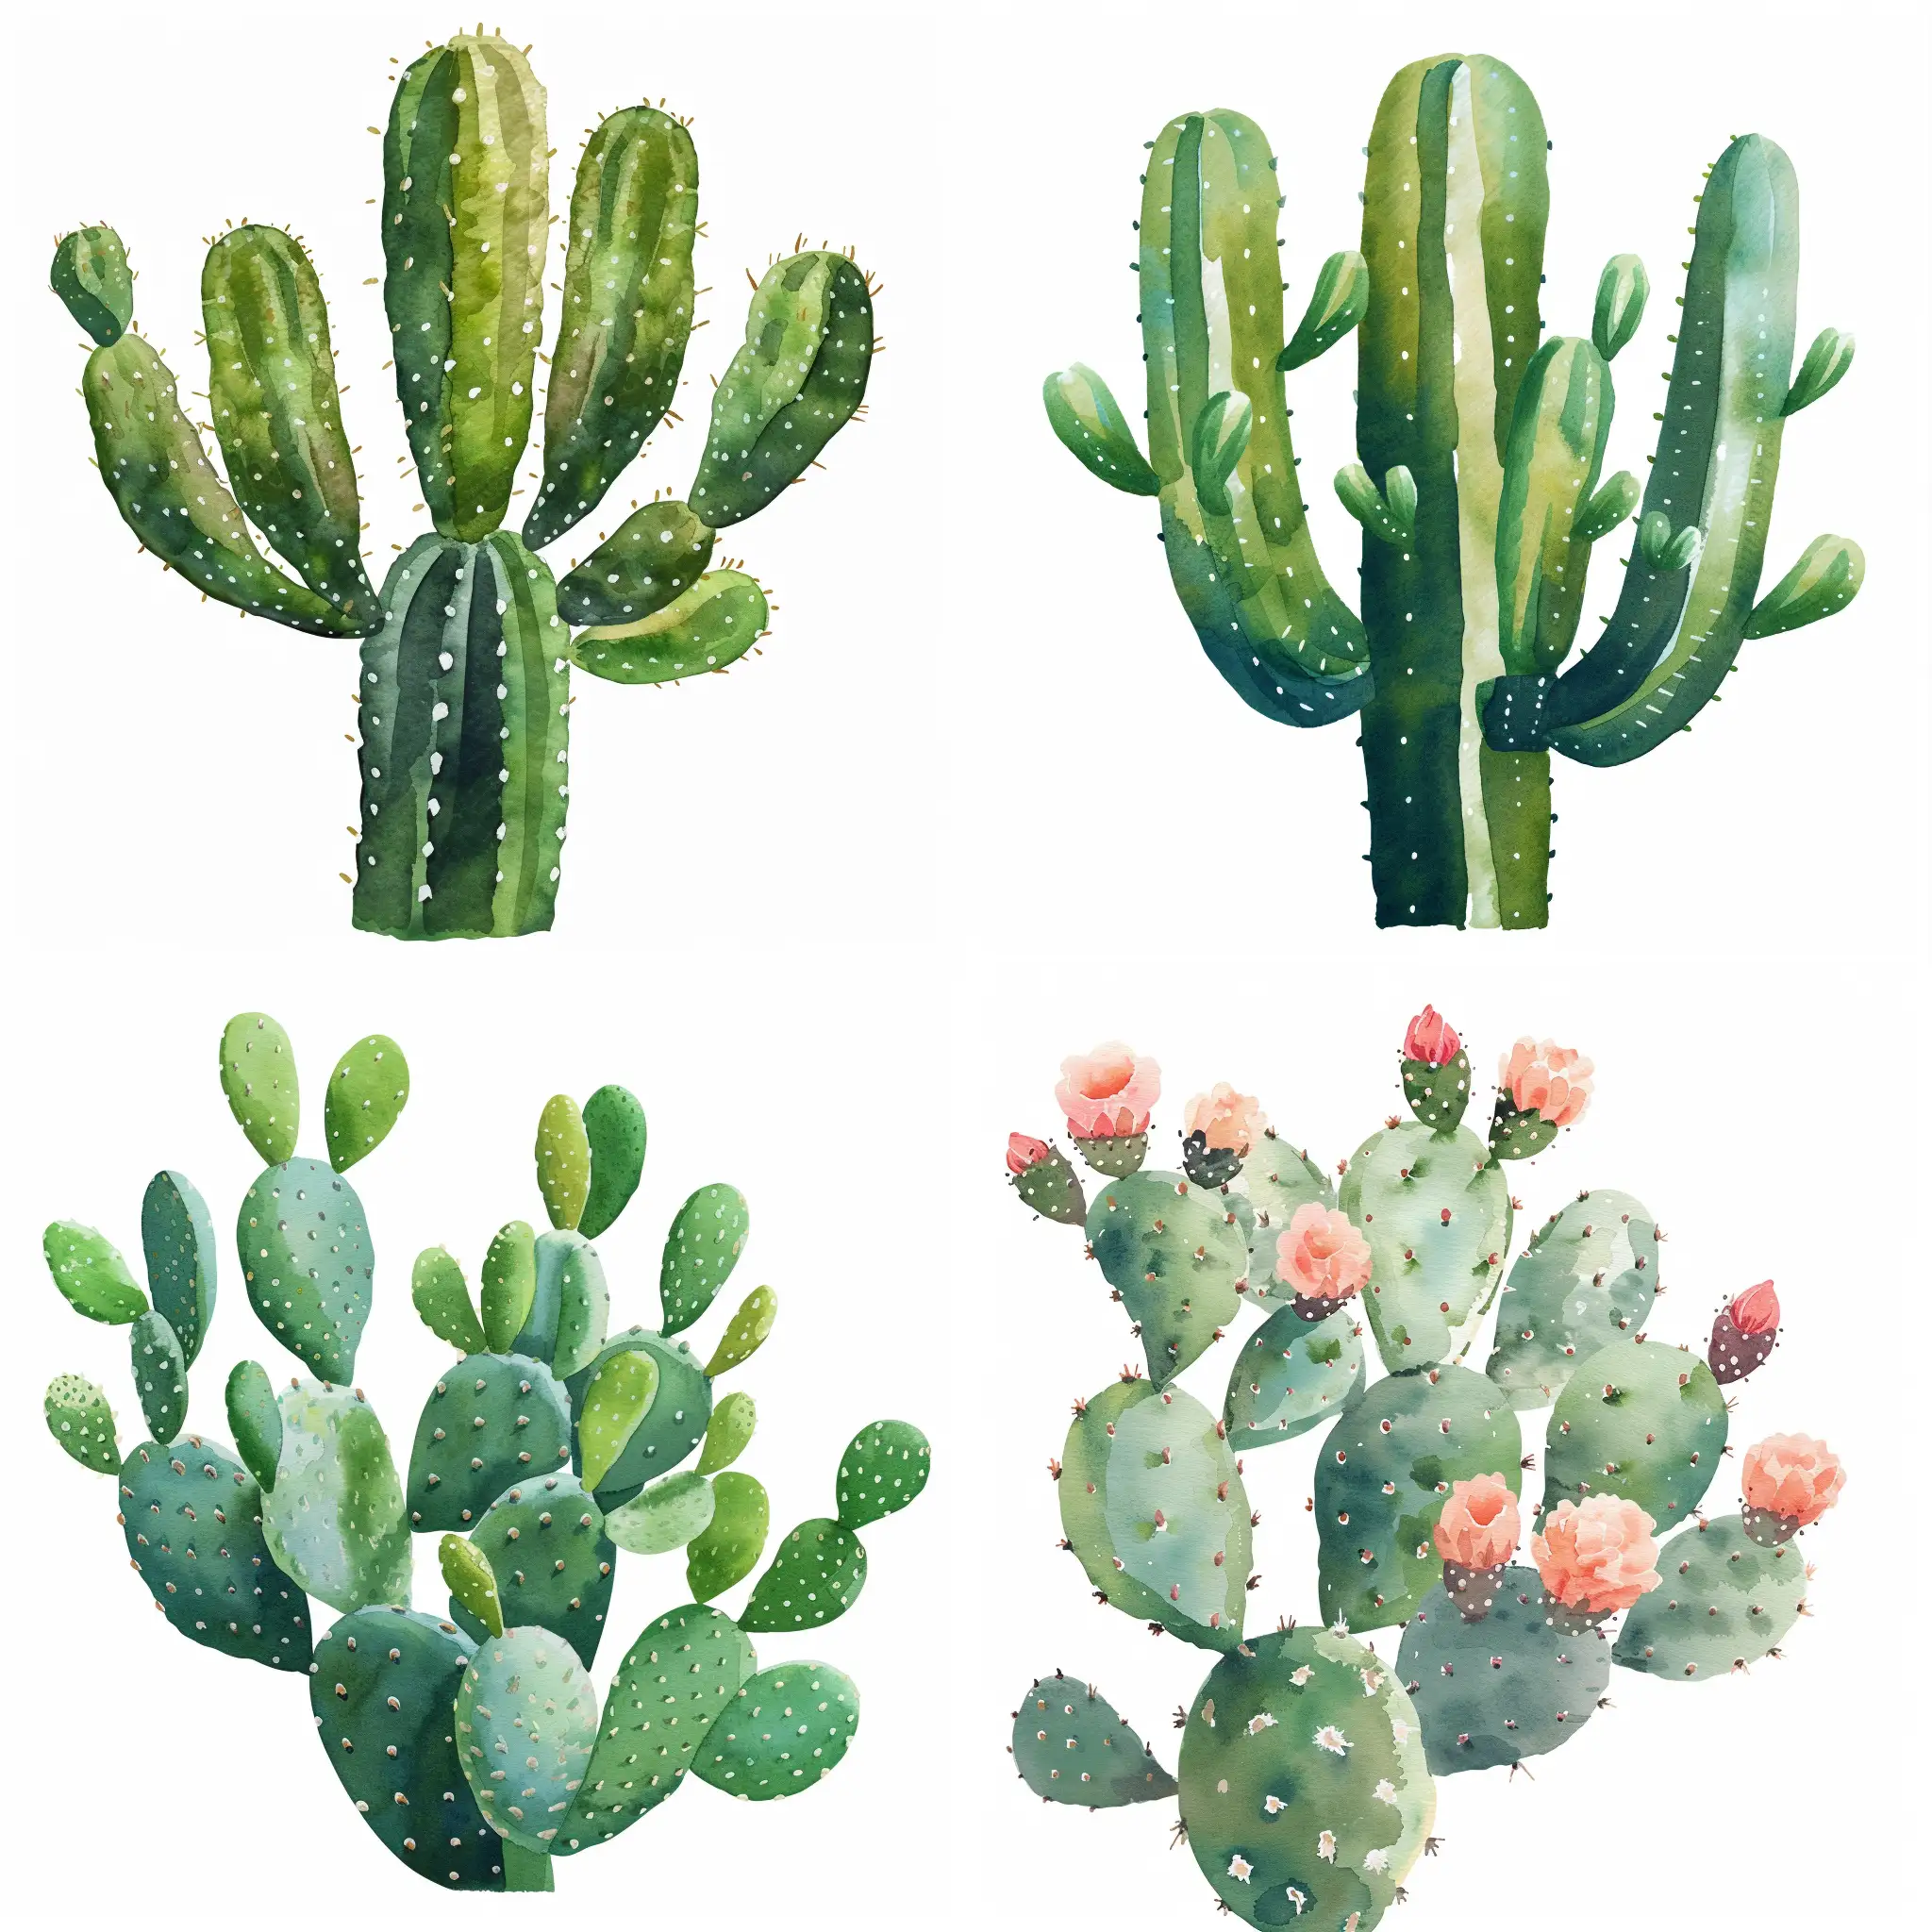 cactus plant in the style of watercolor paiting